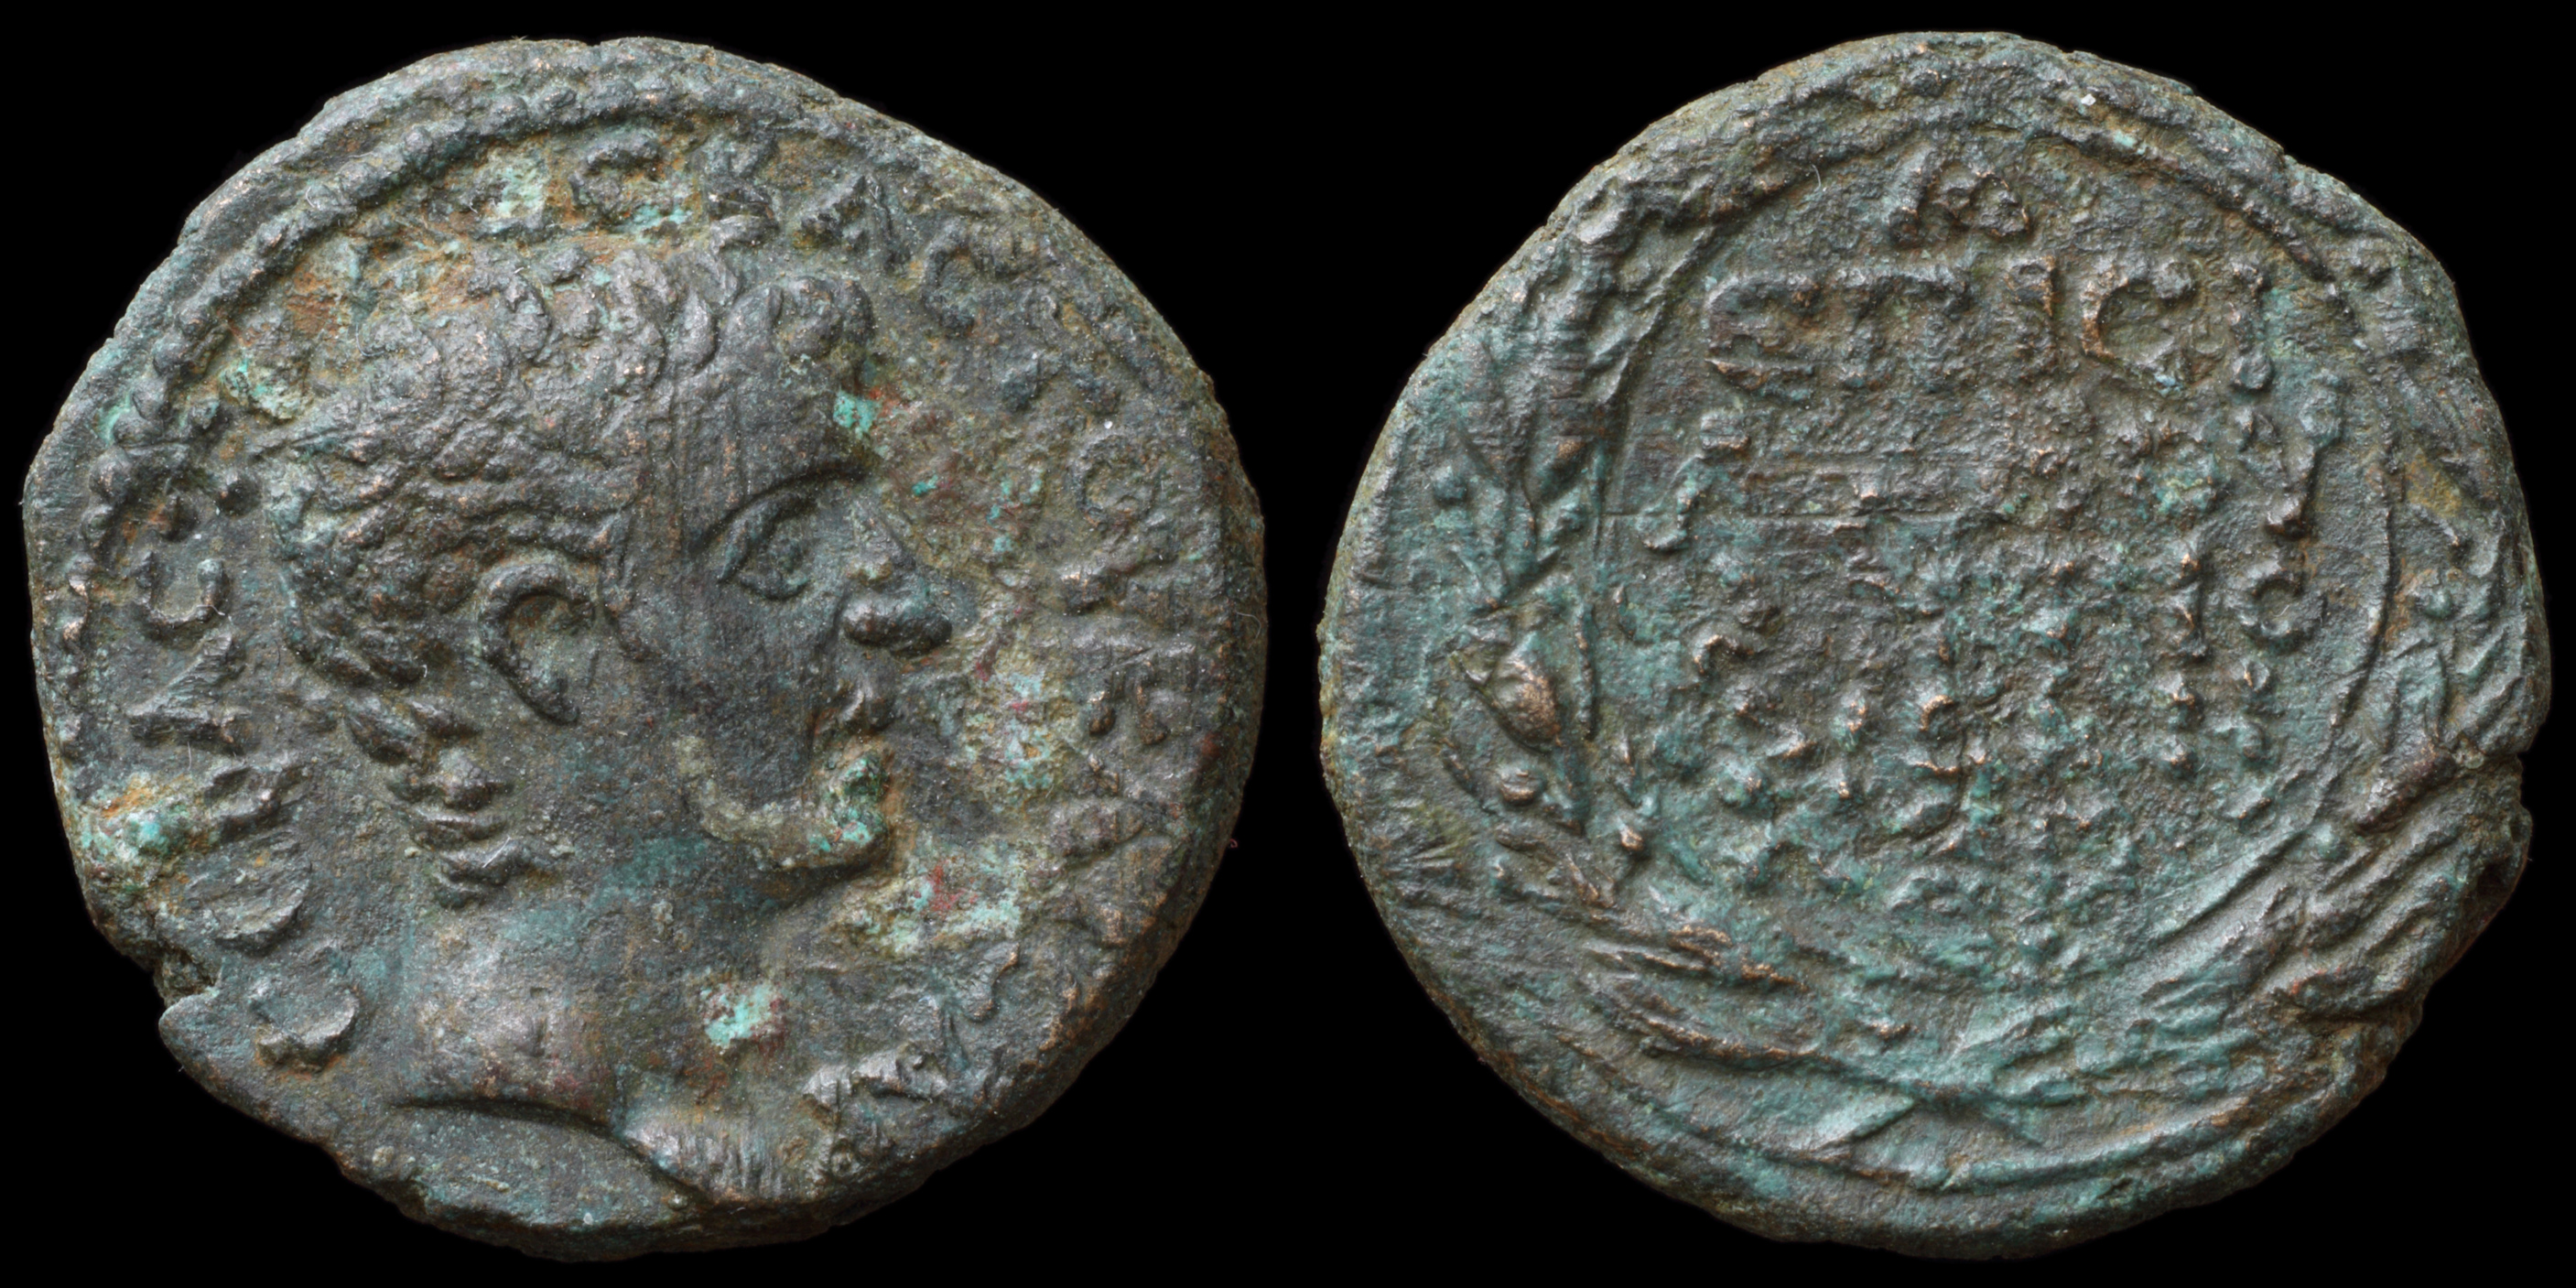 /Files/Images/Coinsite/CoinDB/1644_Tiberius_Antioch.jpg